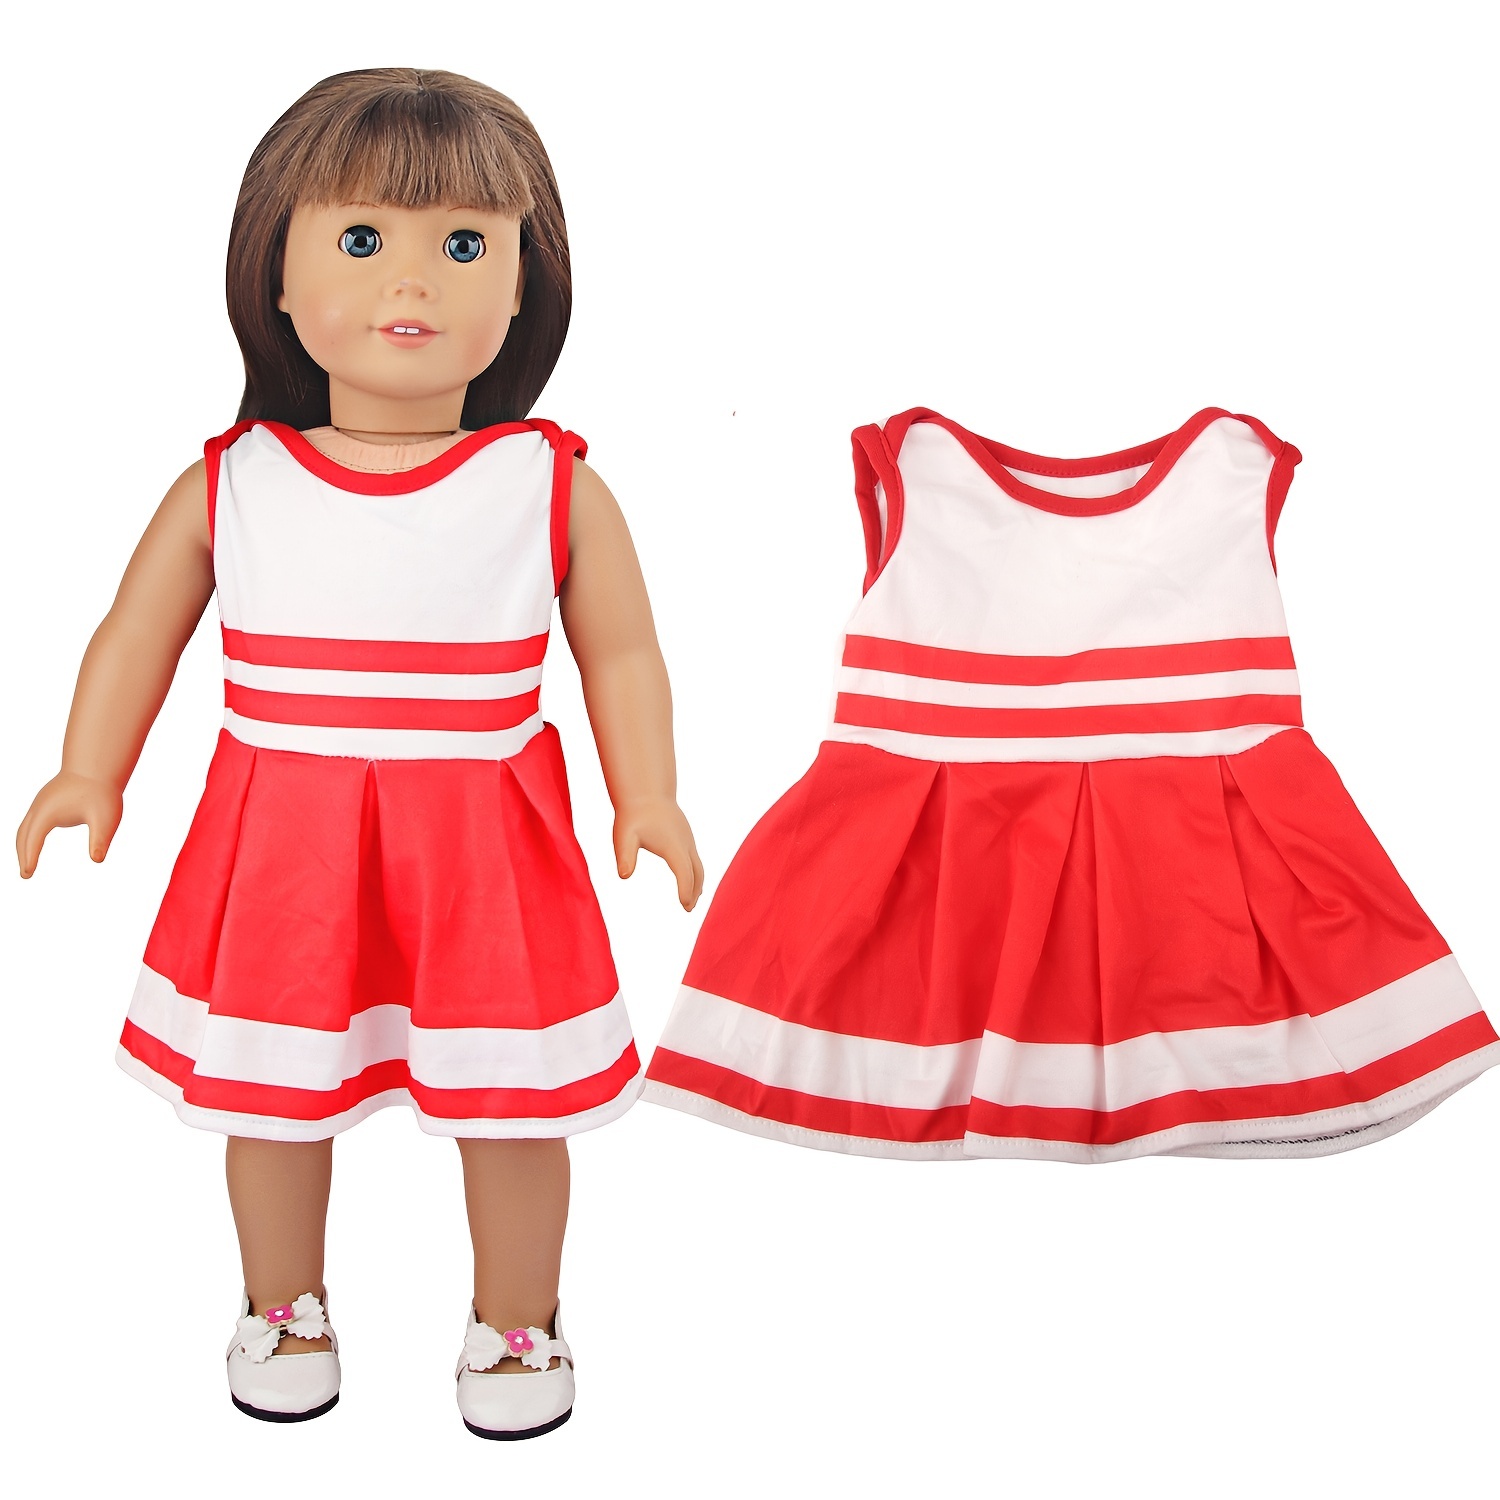  18 Inch Doll Clothes- Pink Cheerleader Outfit Fits 18 Inch  Fashion Girl Dolls : Toys & Games